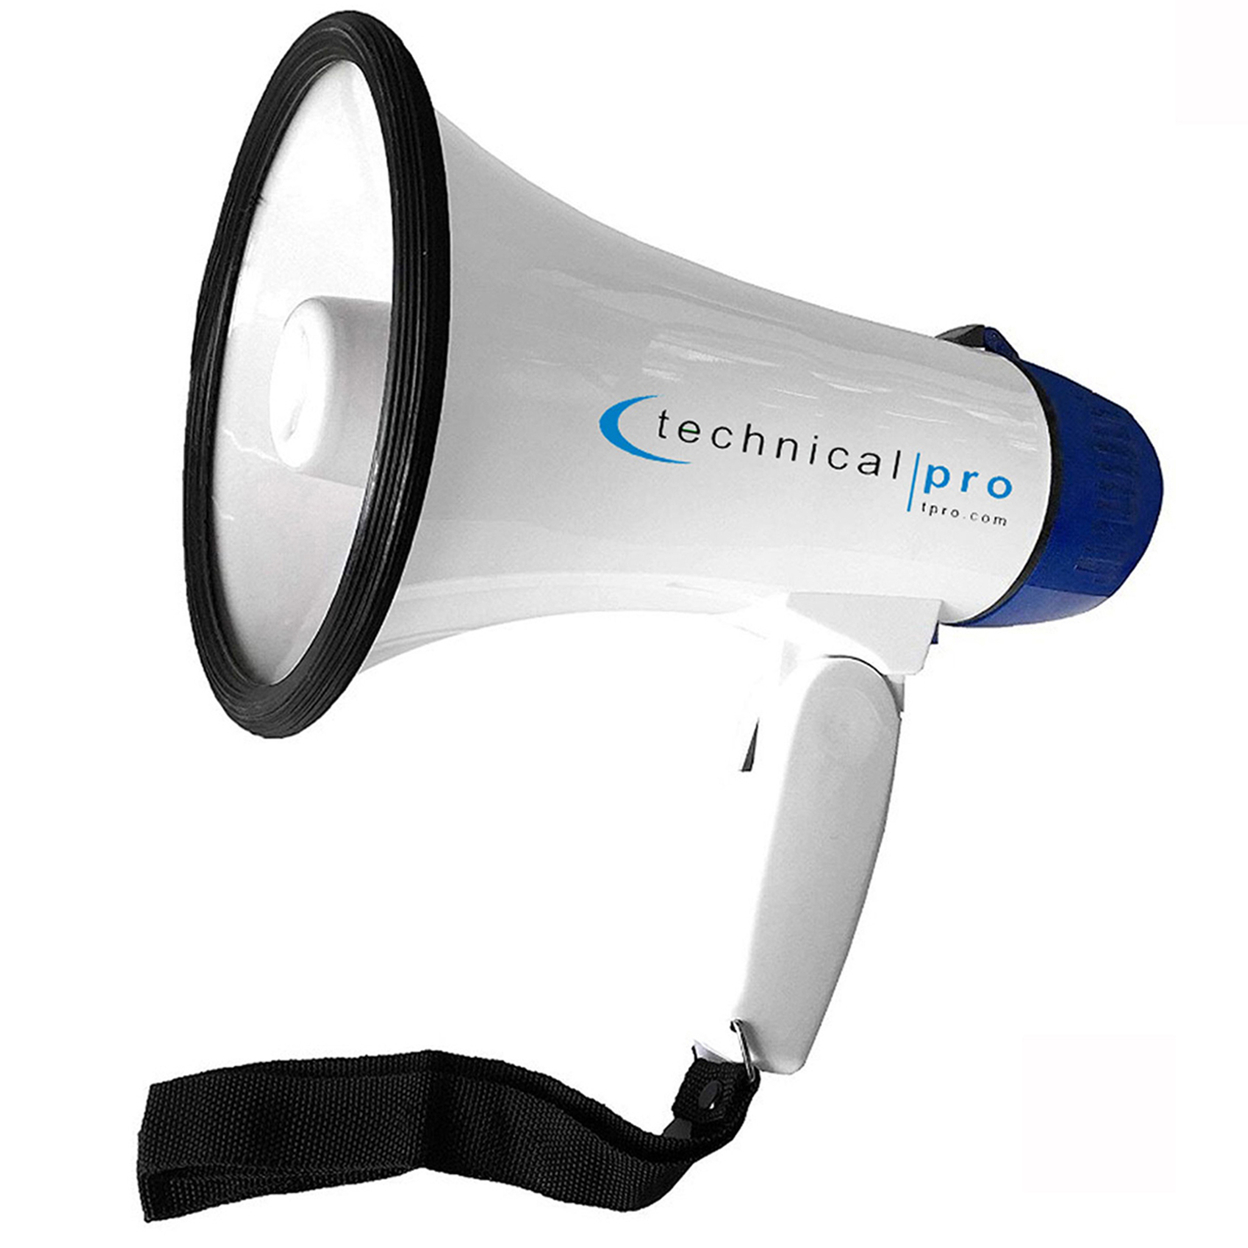 Technical Pro 20 Watts Lightweight Portable 300M Range White And Blue Megaphone Bullhorn With Strap, Siren, And Volume Control